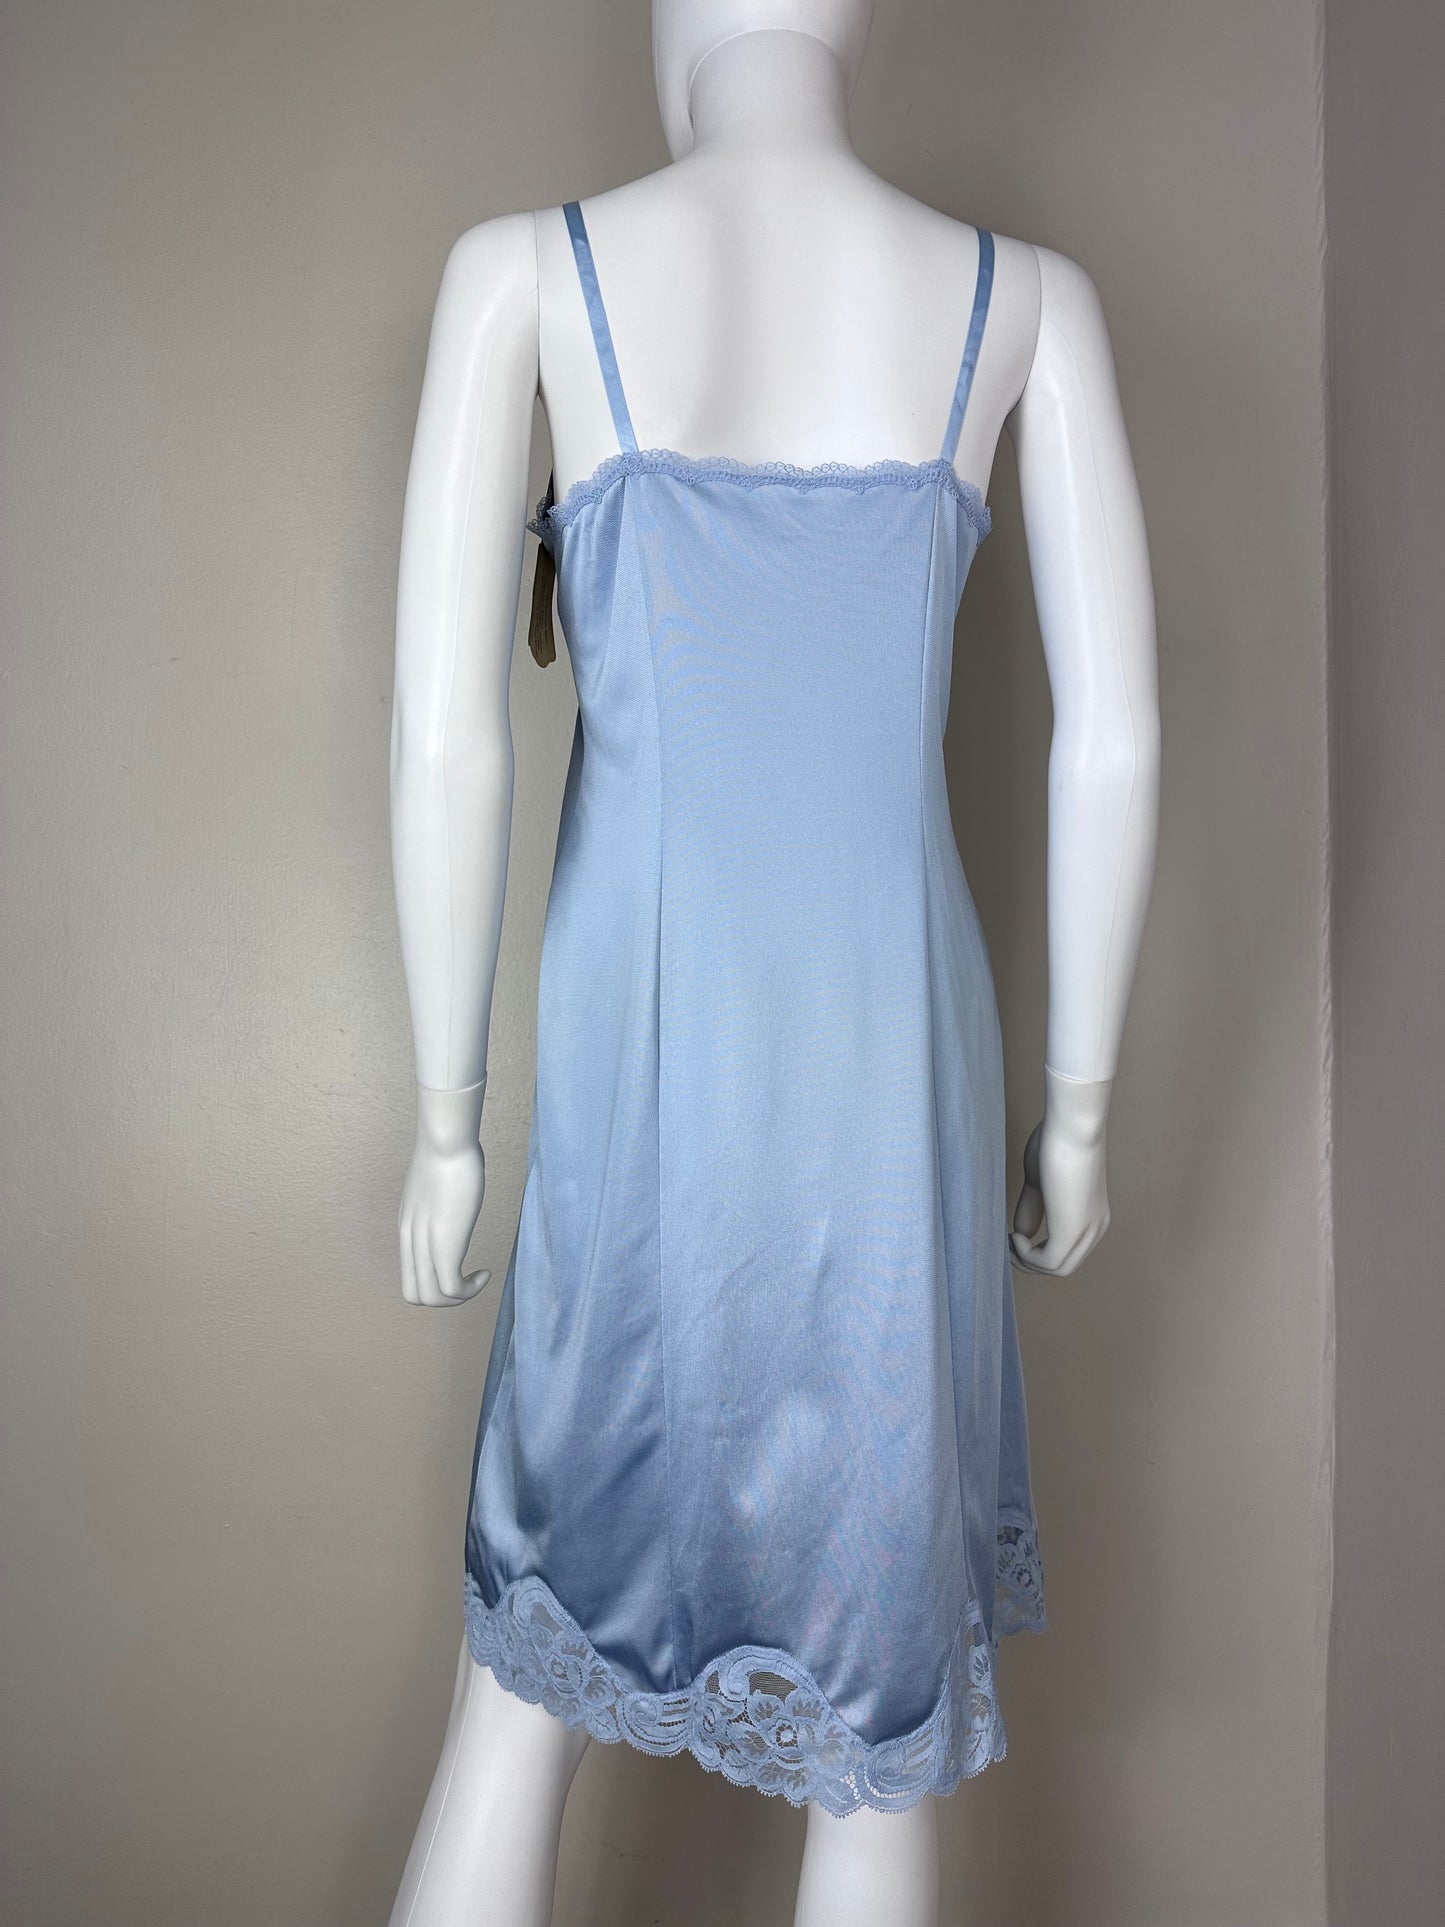 1980s Vanity Fair Nylon Slip, Lace Piquant Sophisticated Elegance Size 34, Pastel Blue, Azure Gray, Deadstock with Tags